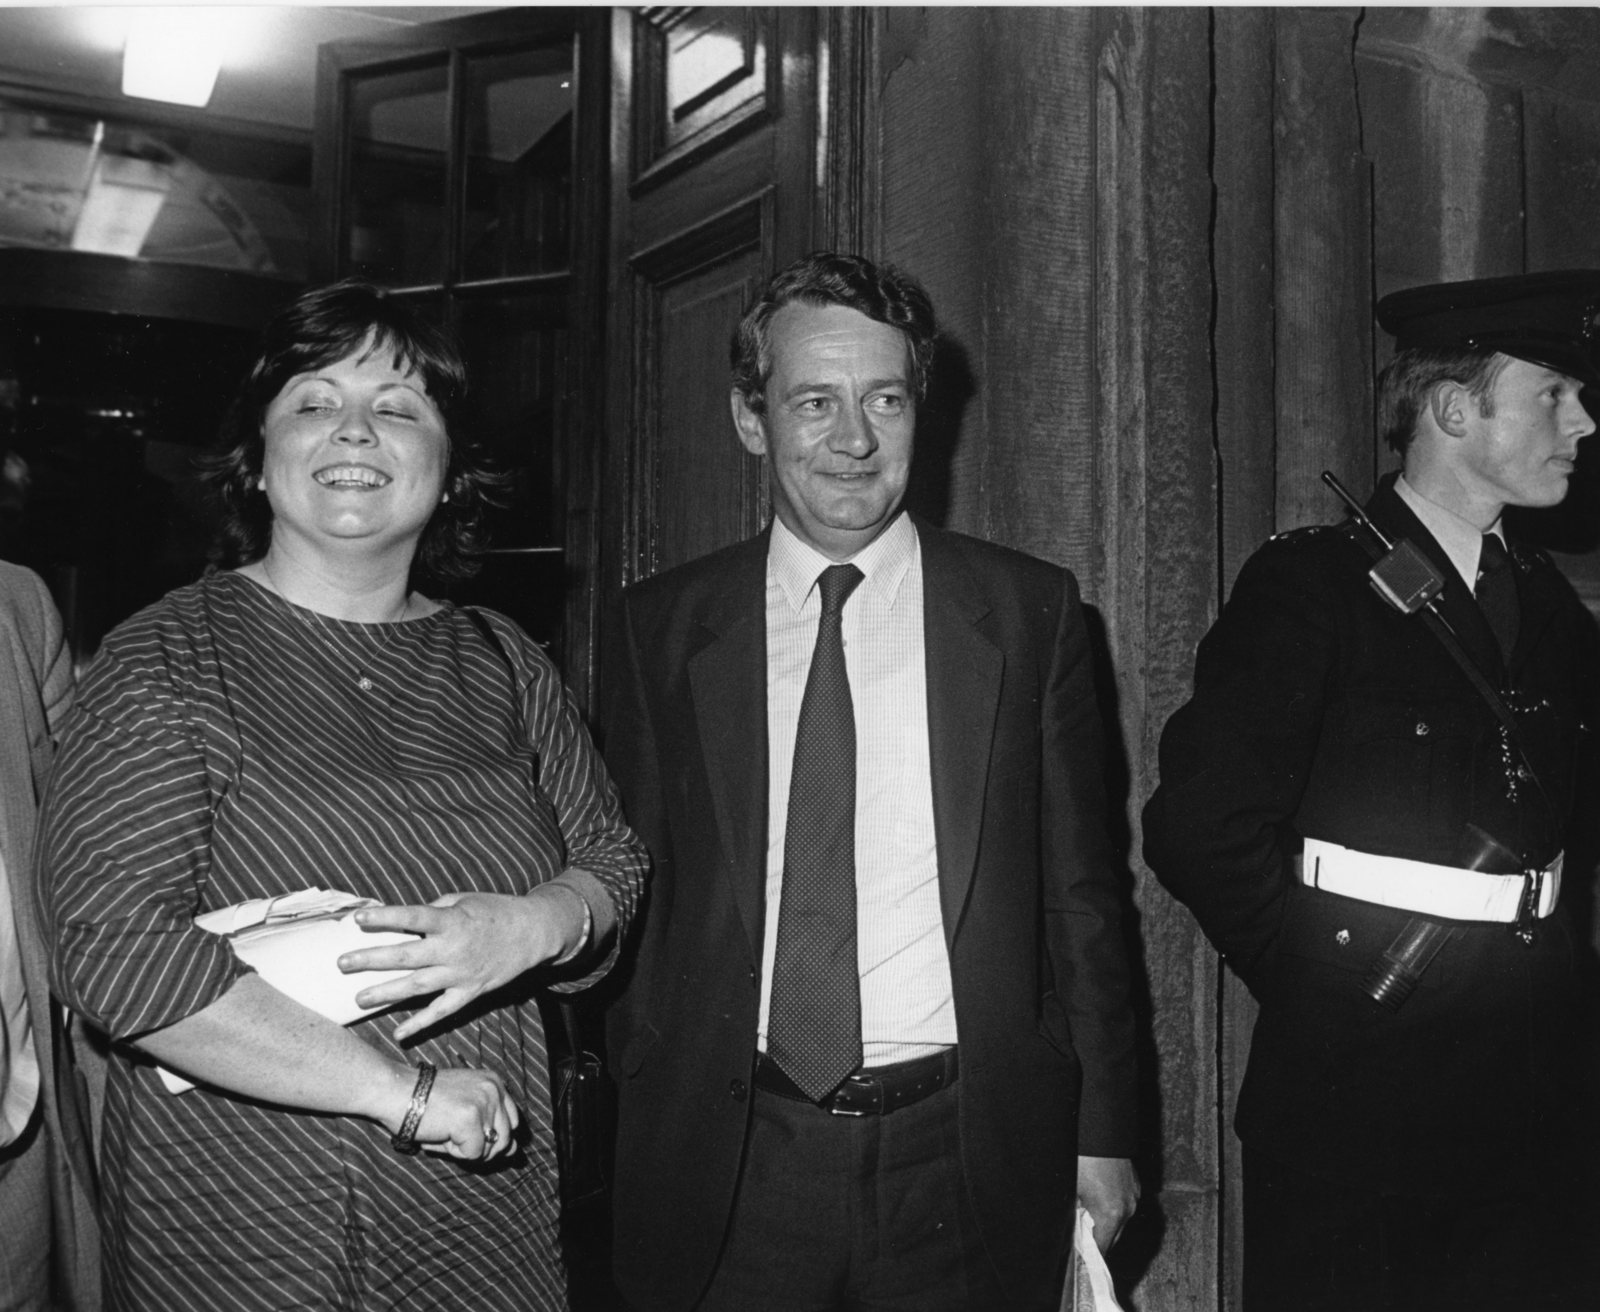 Fianna Fail TD'S Mary Harney and Des O’Malley outside the door of Dáil Eireann after Mr. O'Malley was expelled from the party, 18-05-1984